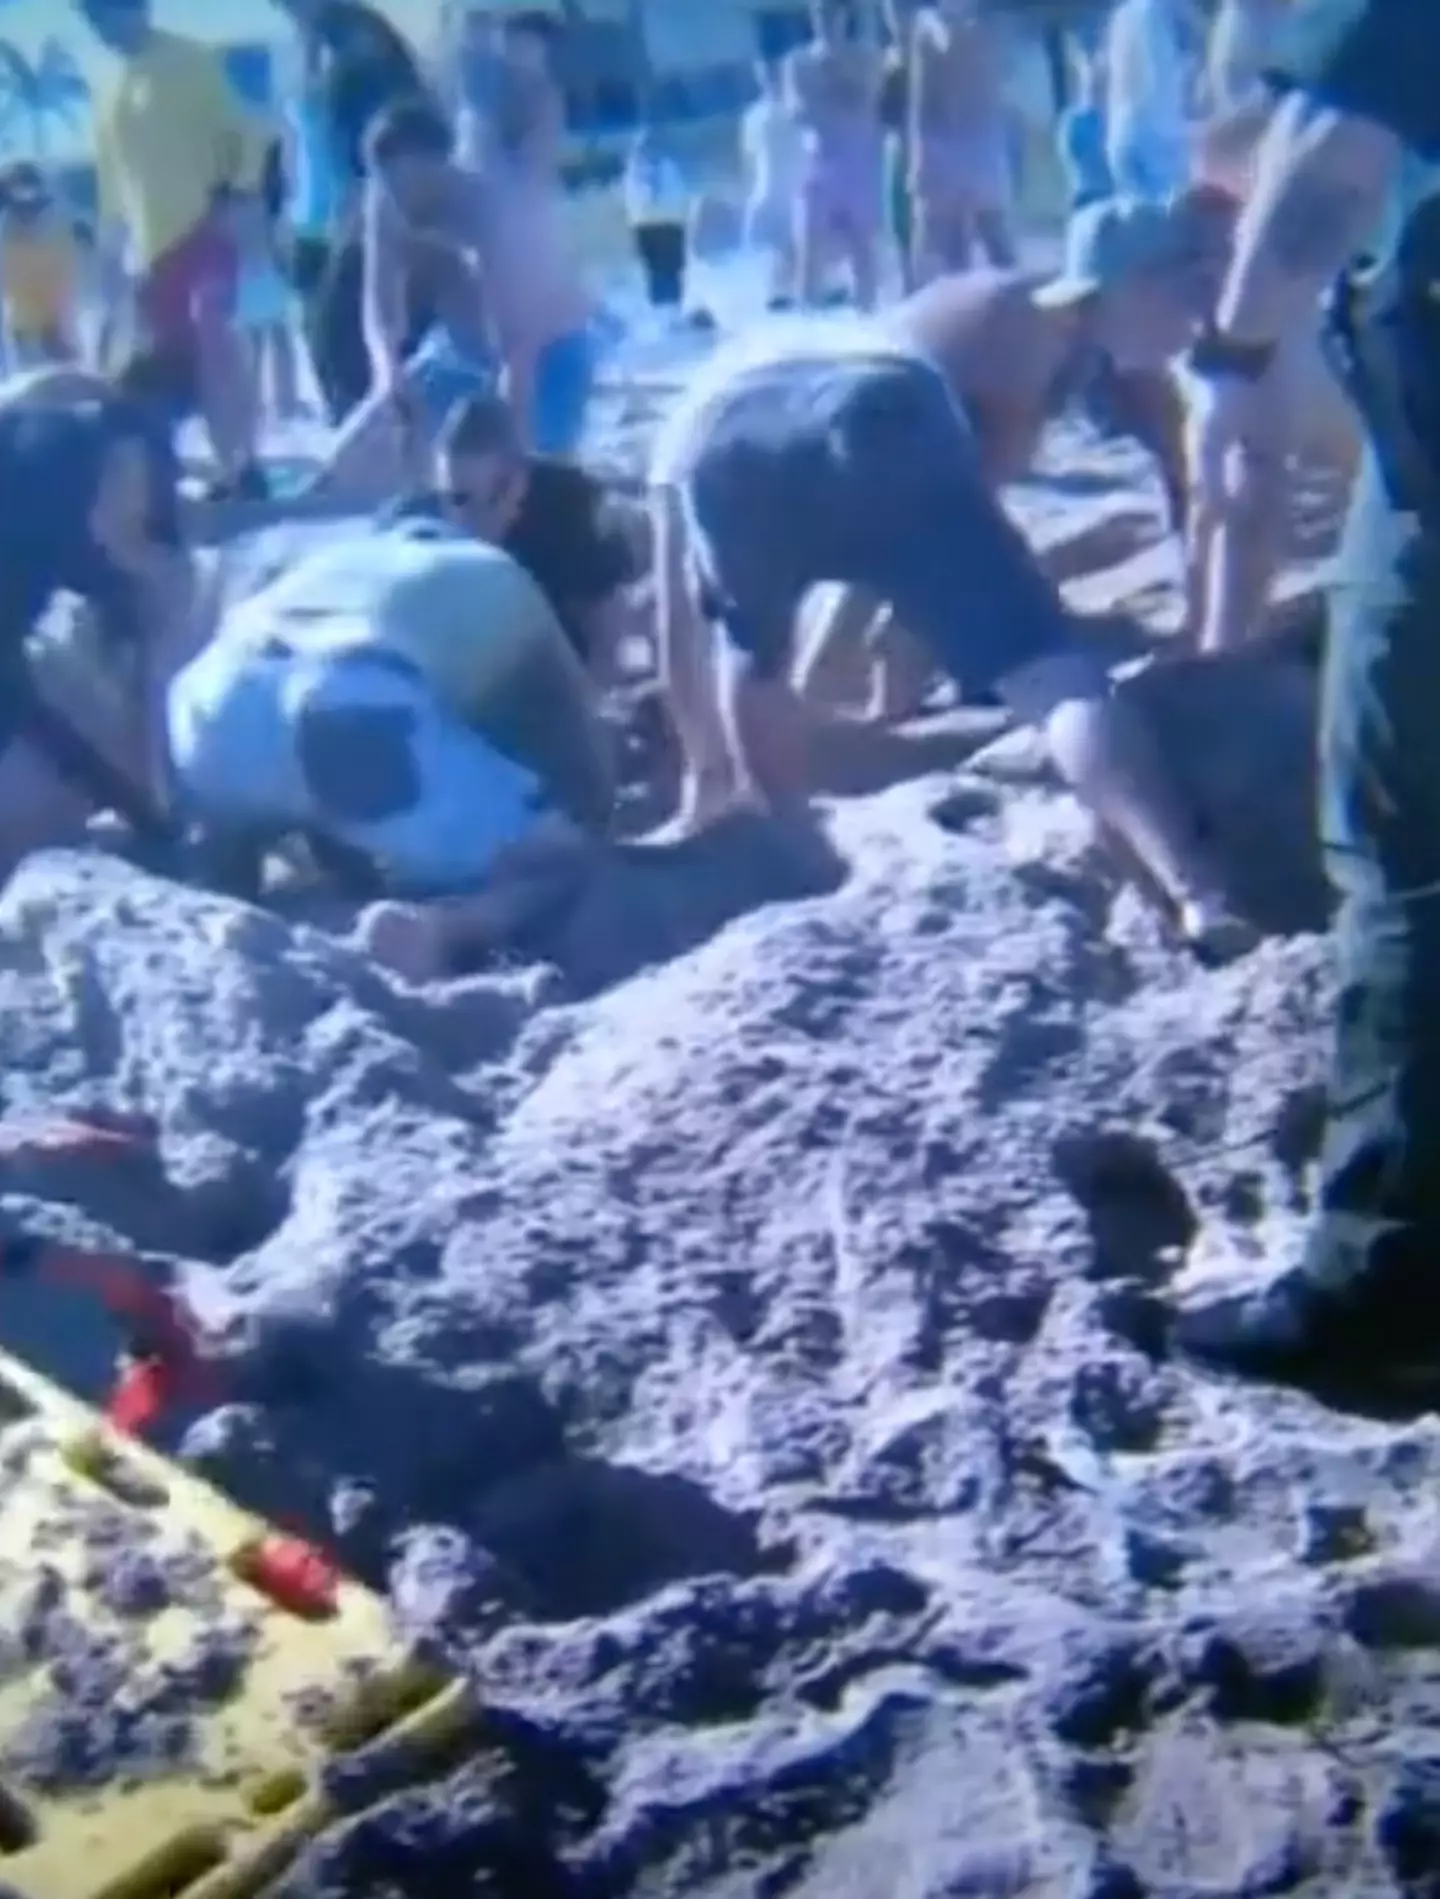 Emergency services and fellow beachgoers worked desperately to get the children out.